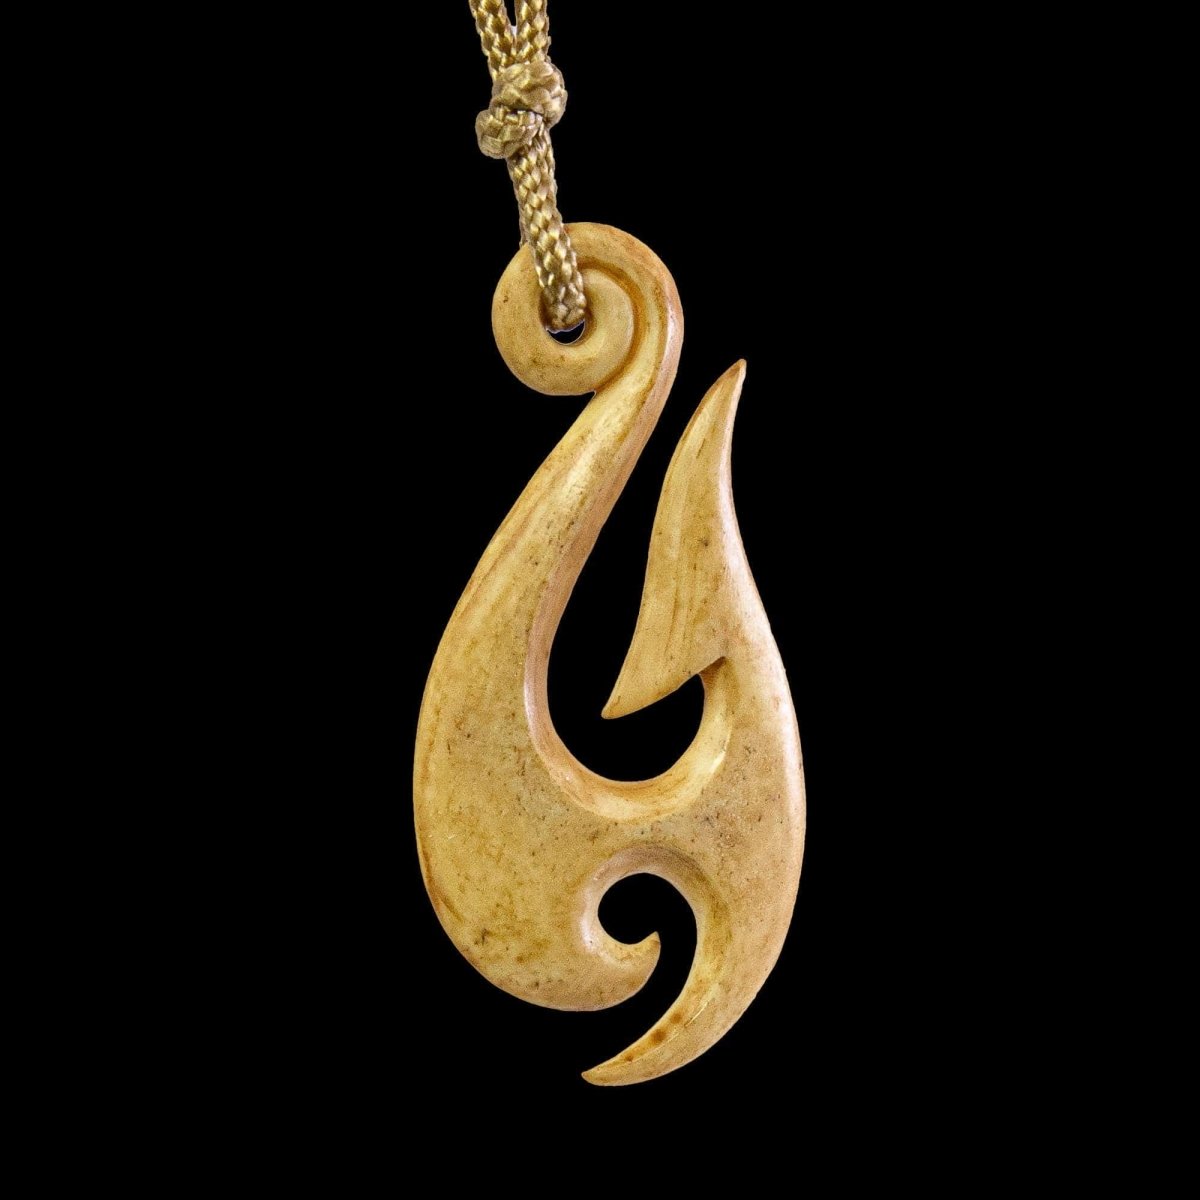 New Zealand Maori Inspired Hei Matau Aged Fish Hook Necklace - Earthbound Pacific